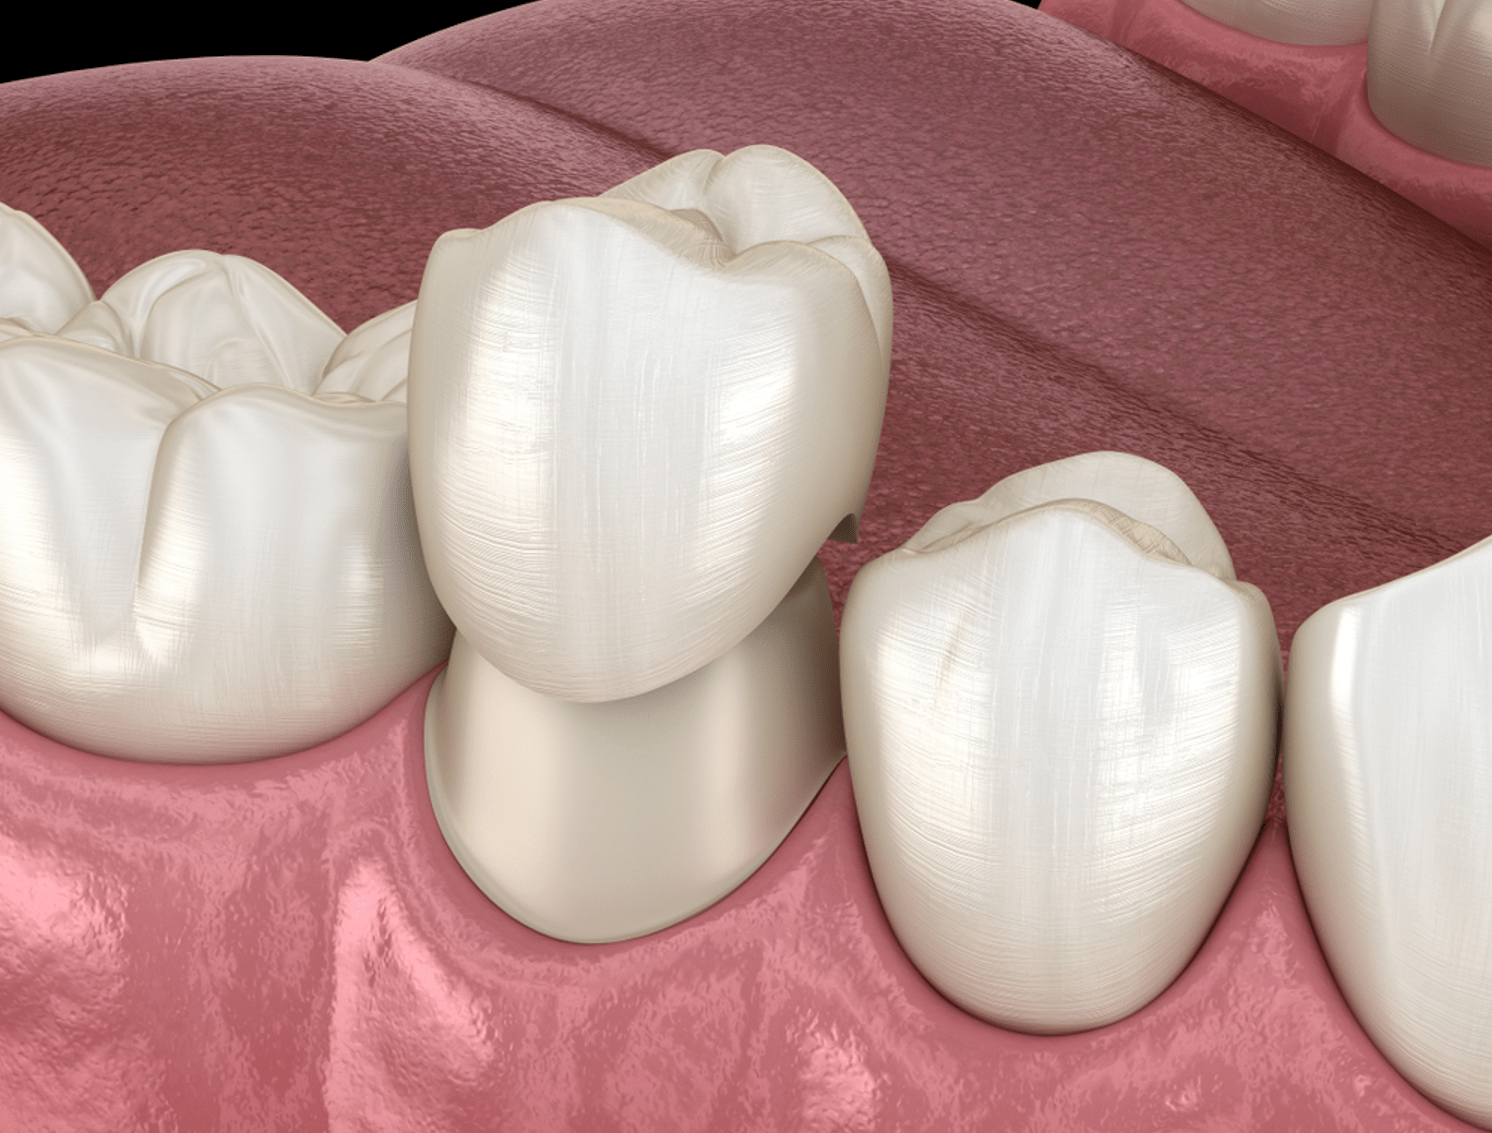 What are Dental Crowns and What Makes Them a Good Choice?